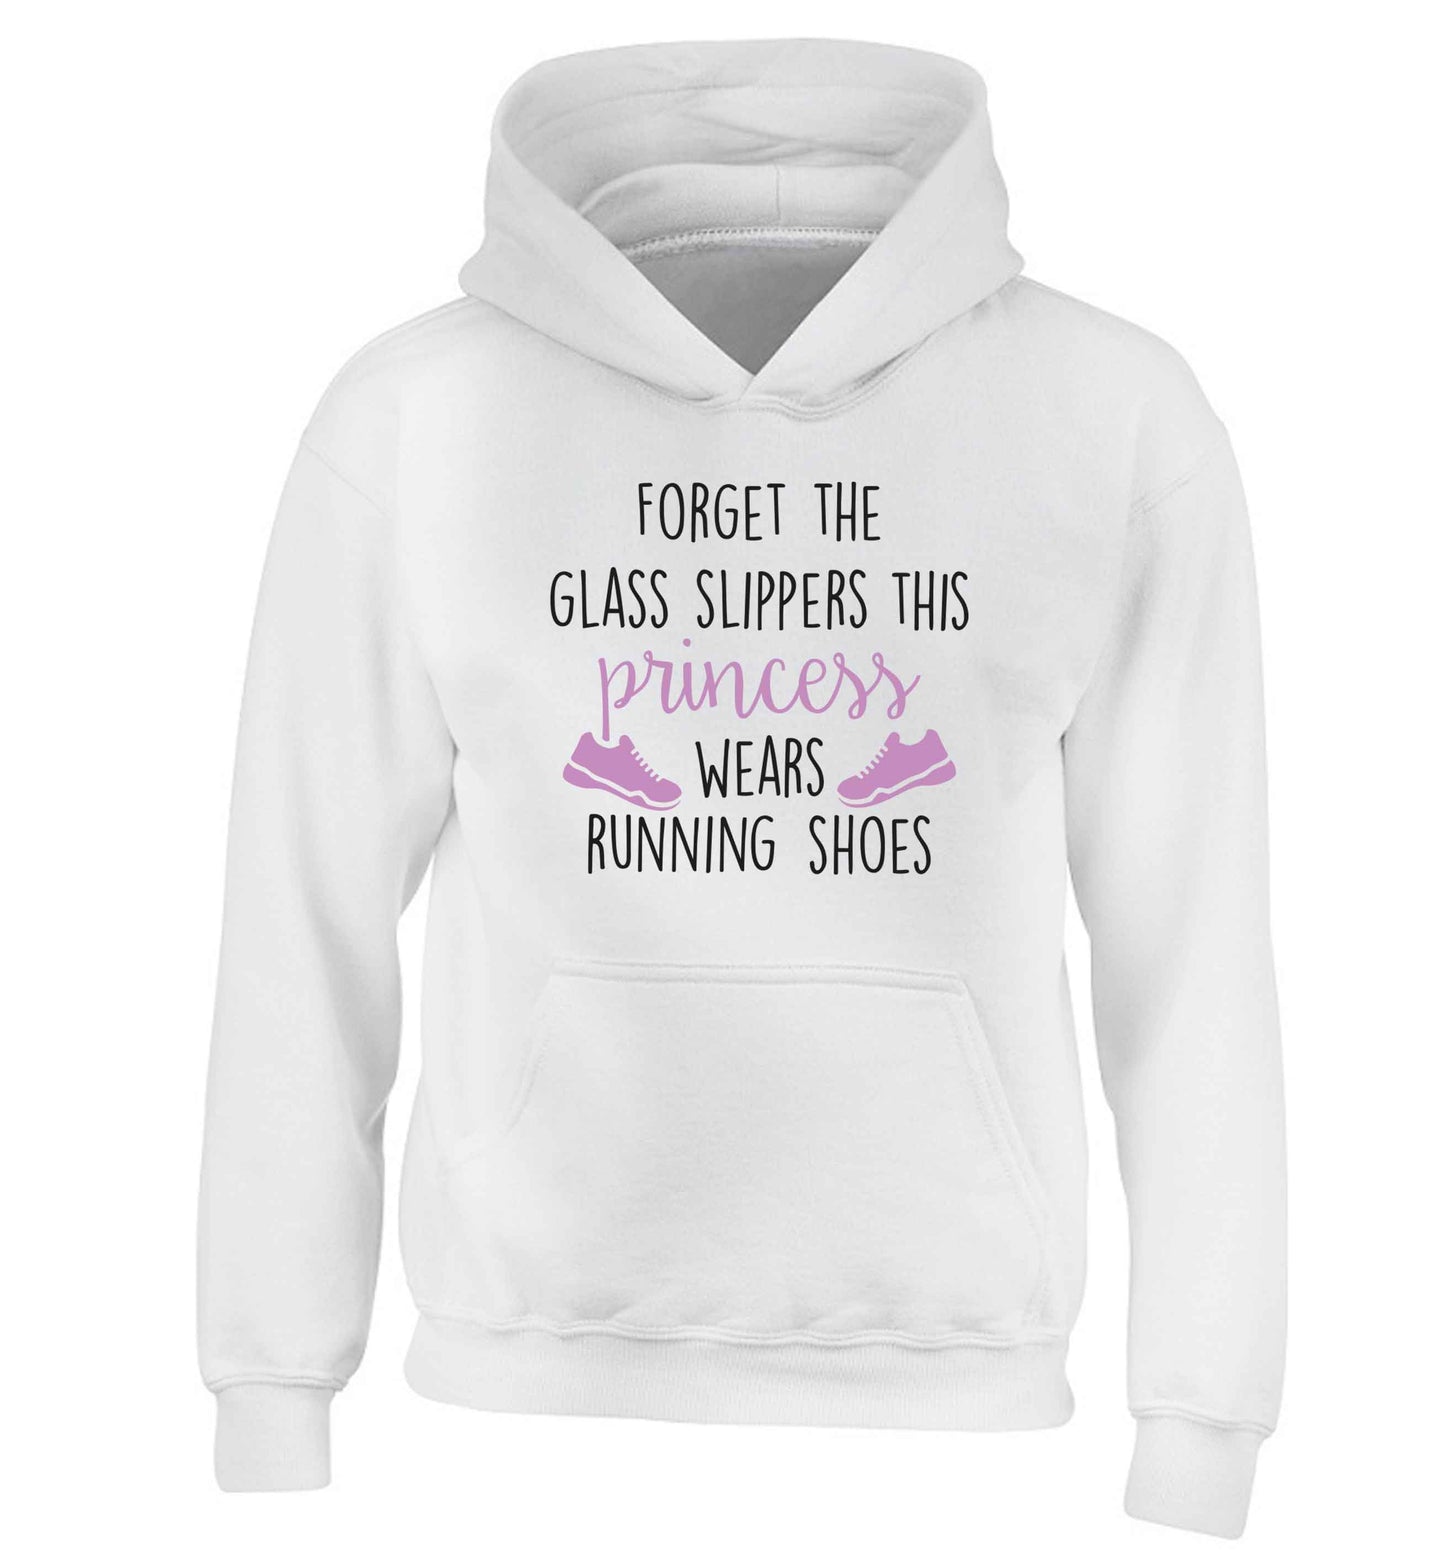 Forget the glass slippers this princess wears running shoes children's white hoodie 12-13 Years